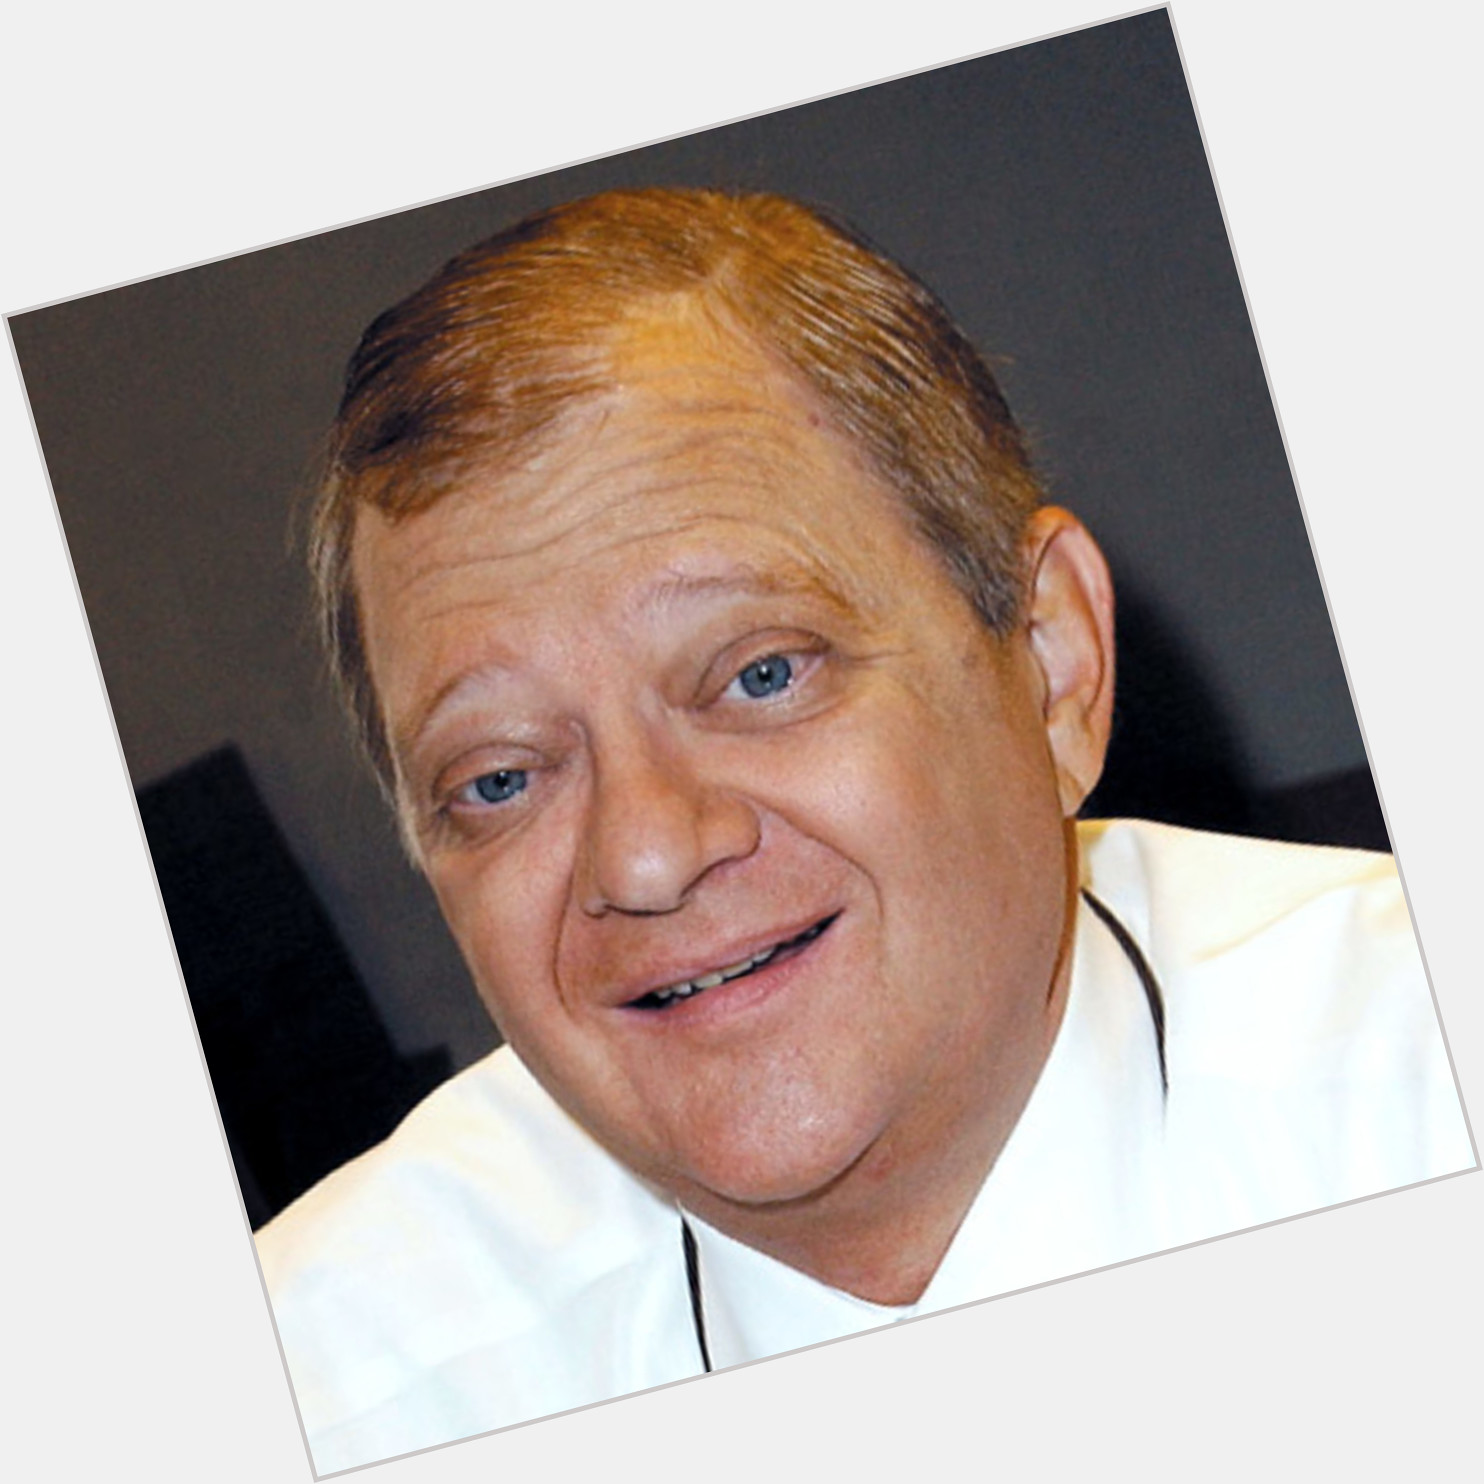 Happy Birthday to Tom Clancy, author of the famous Jack Ryan novels on what would have been his 73rd birthday 